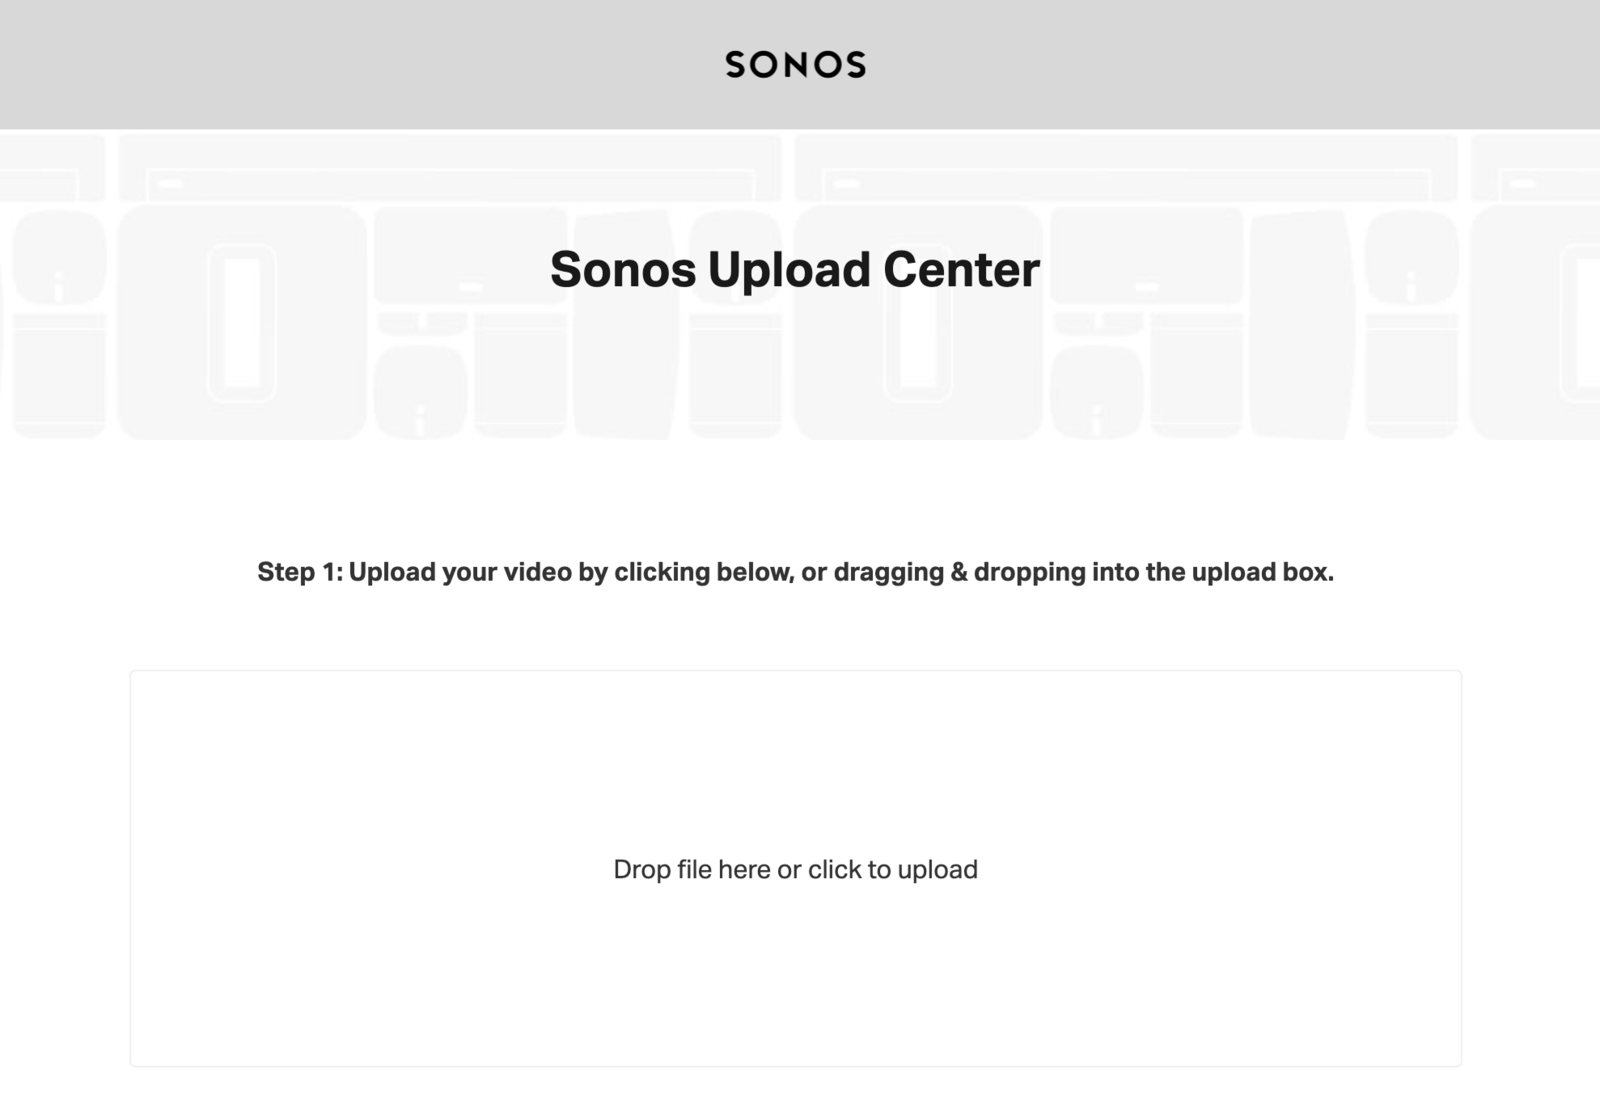 An example of how Sonos use our widget to handle file uploads for support